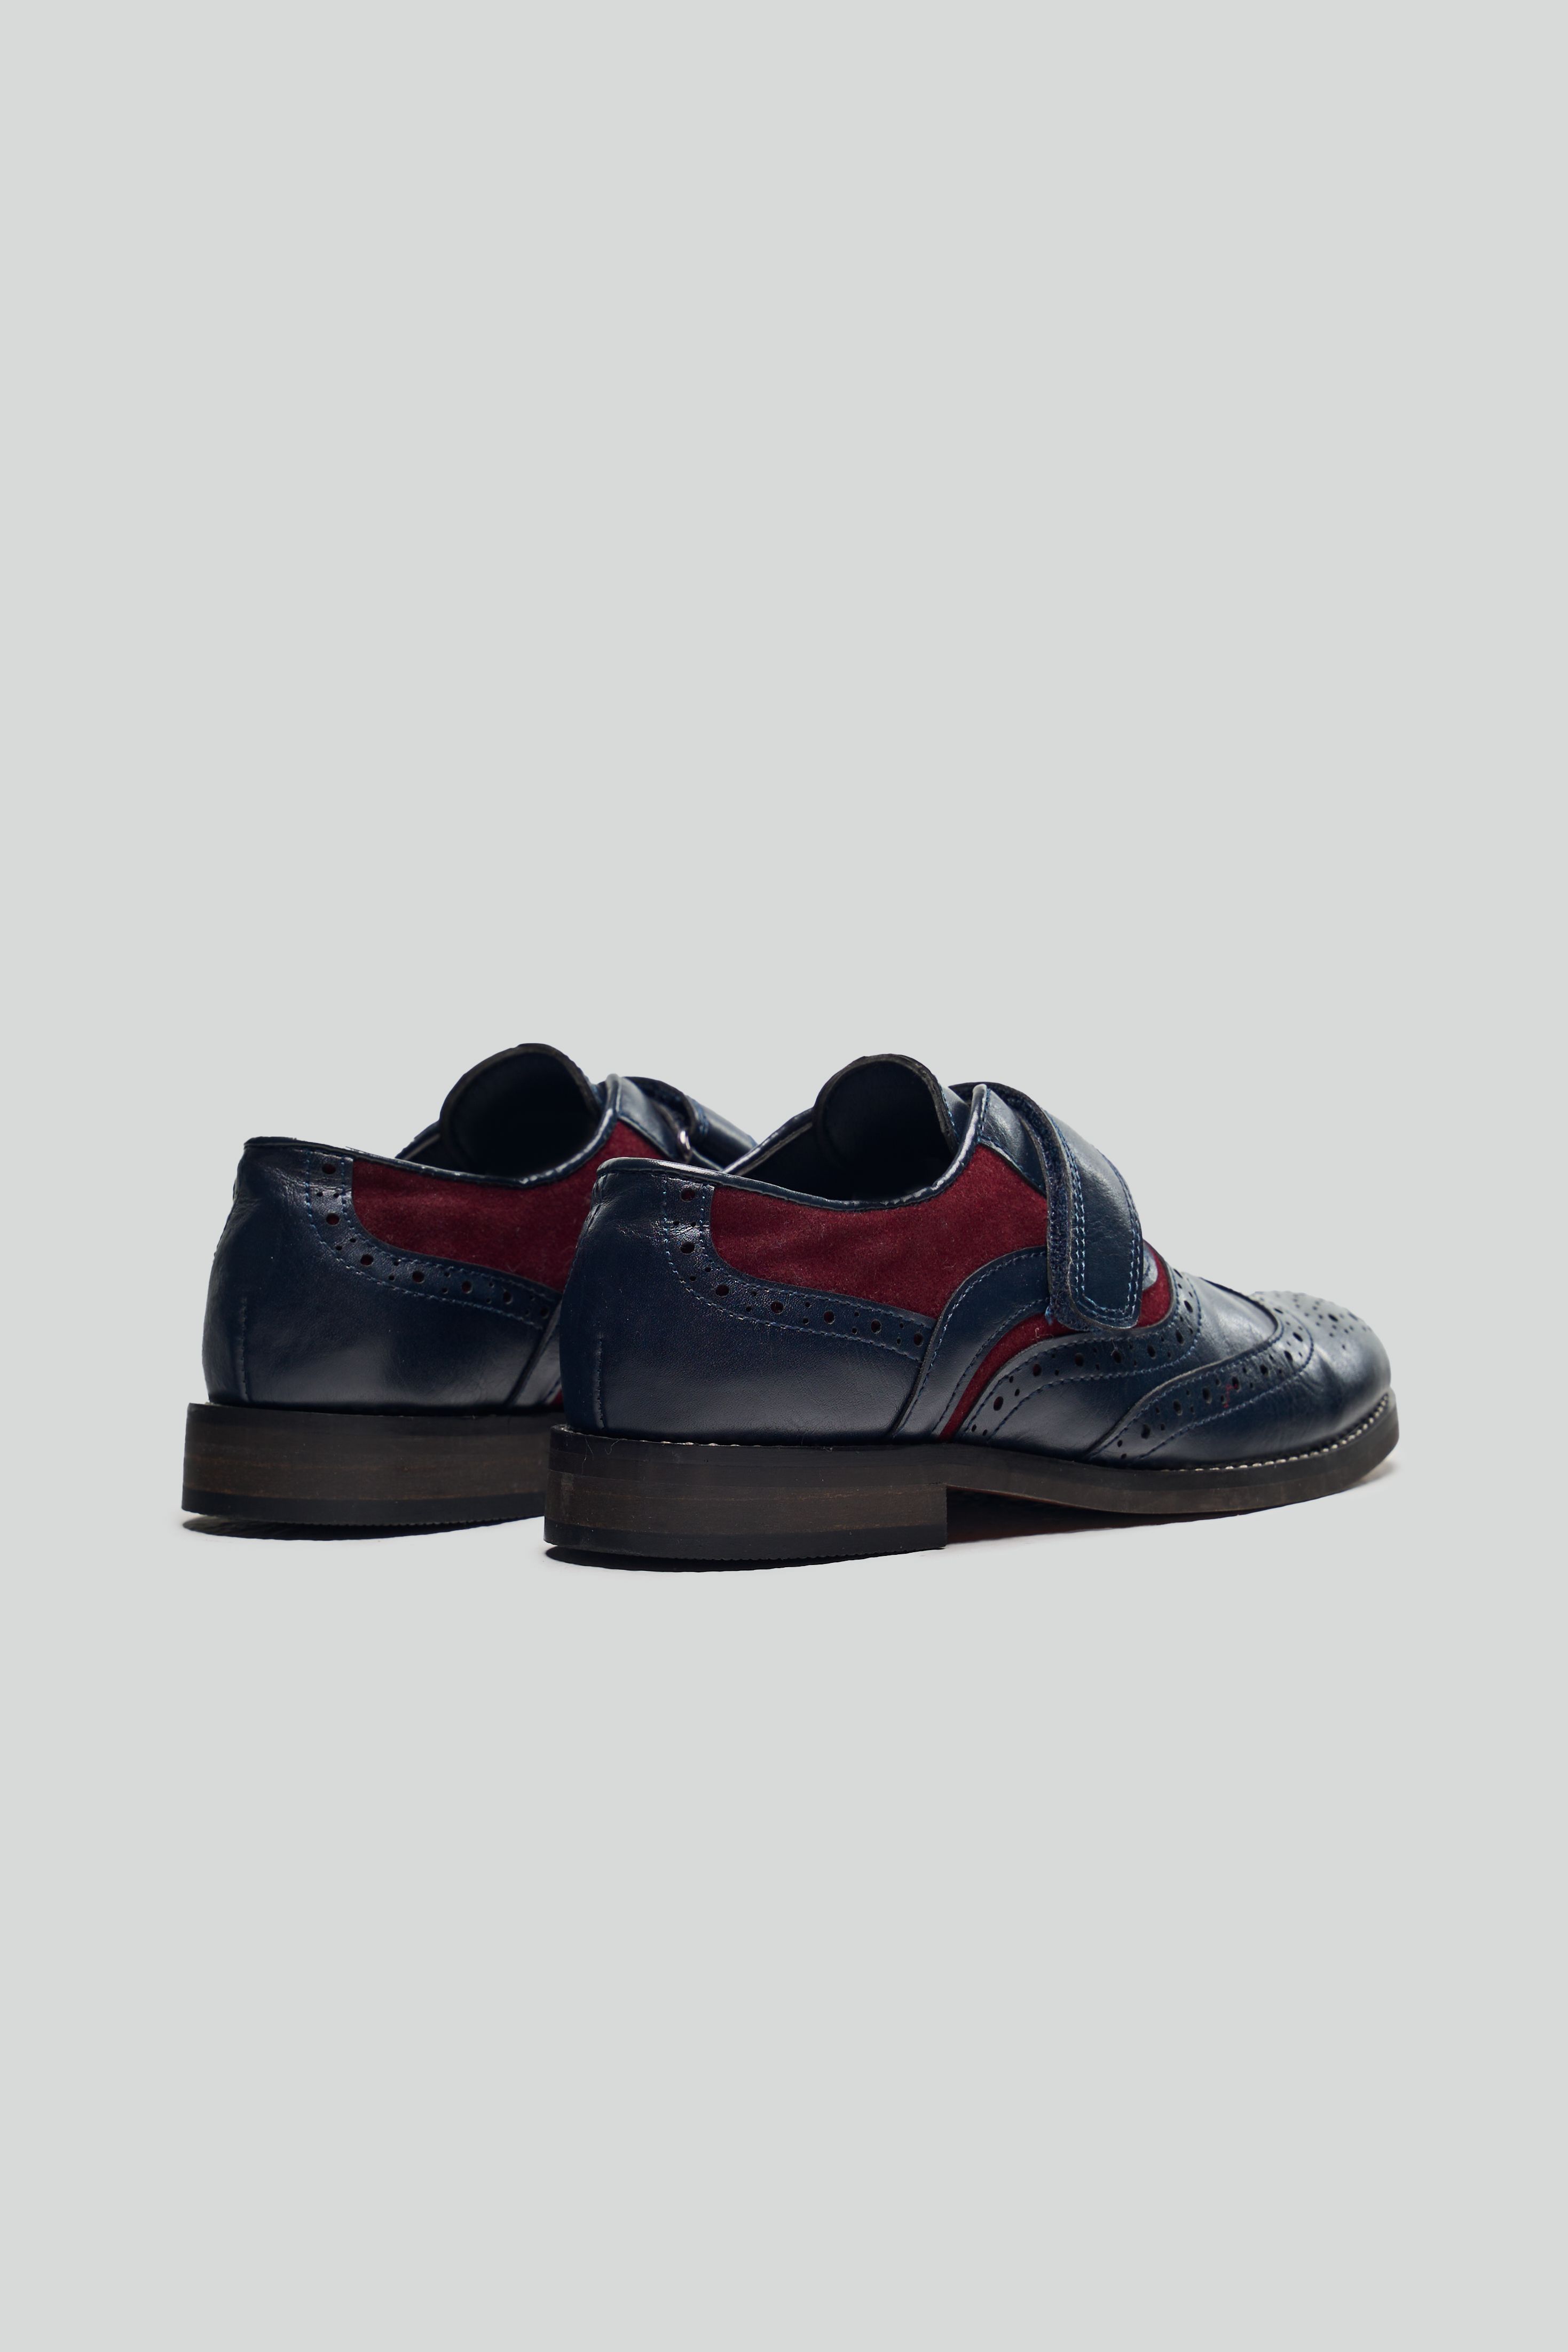 Boys Velcro Oxford Brogue Dress shoes - RUSSEL - Navy Blue - Red